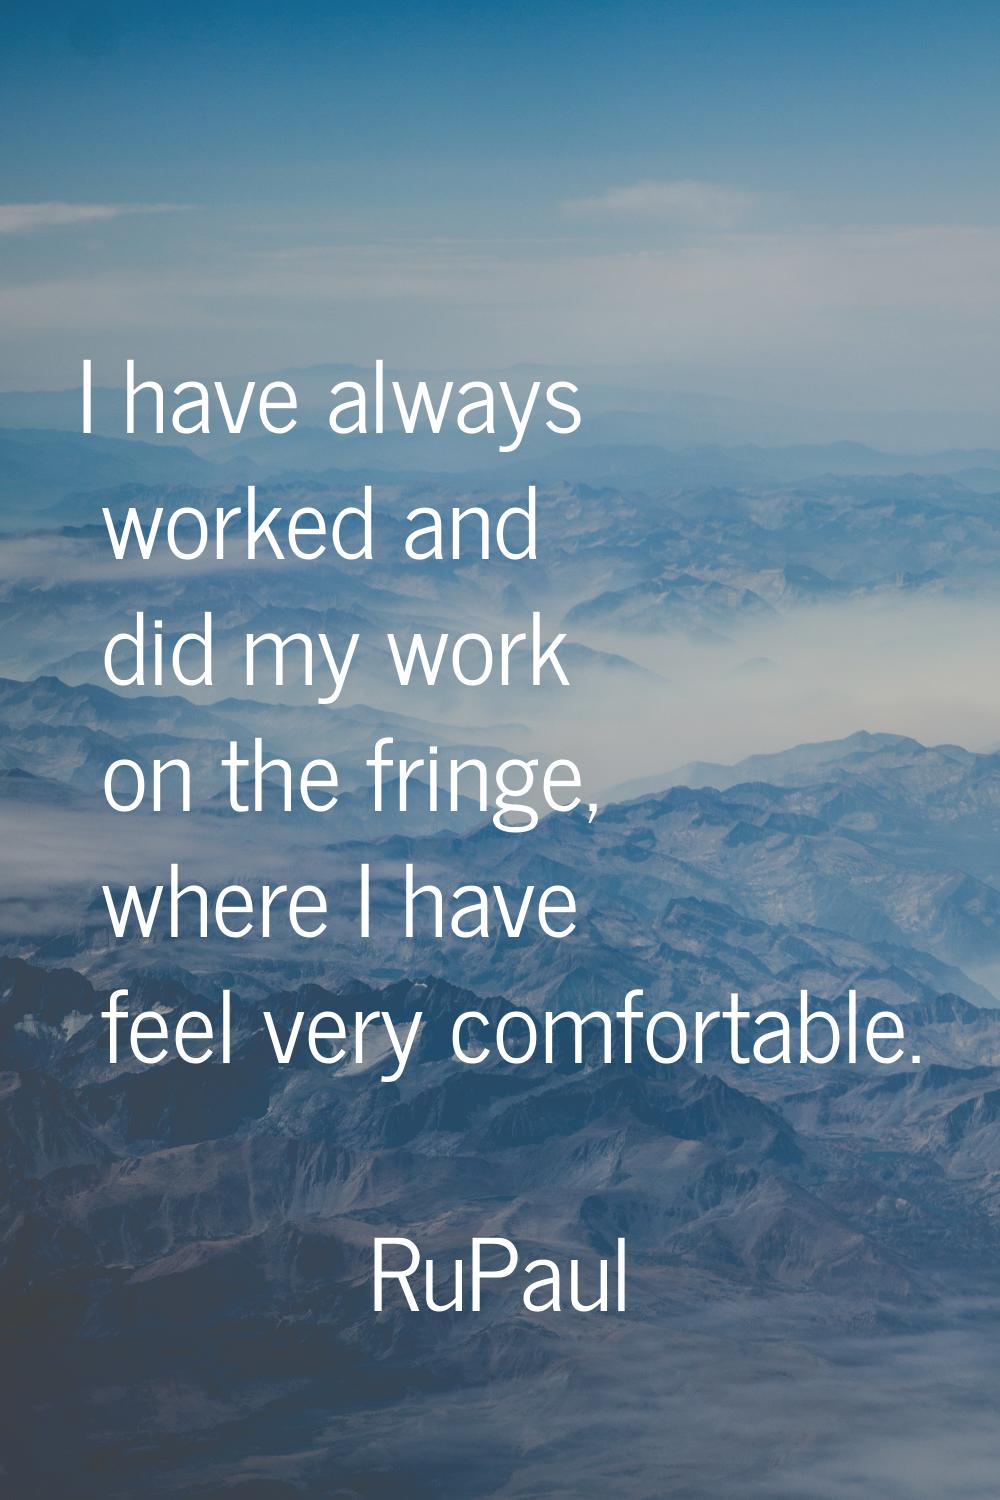 I have always worked and did my work on the fringe, where I have feel very comfortable.